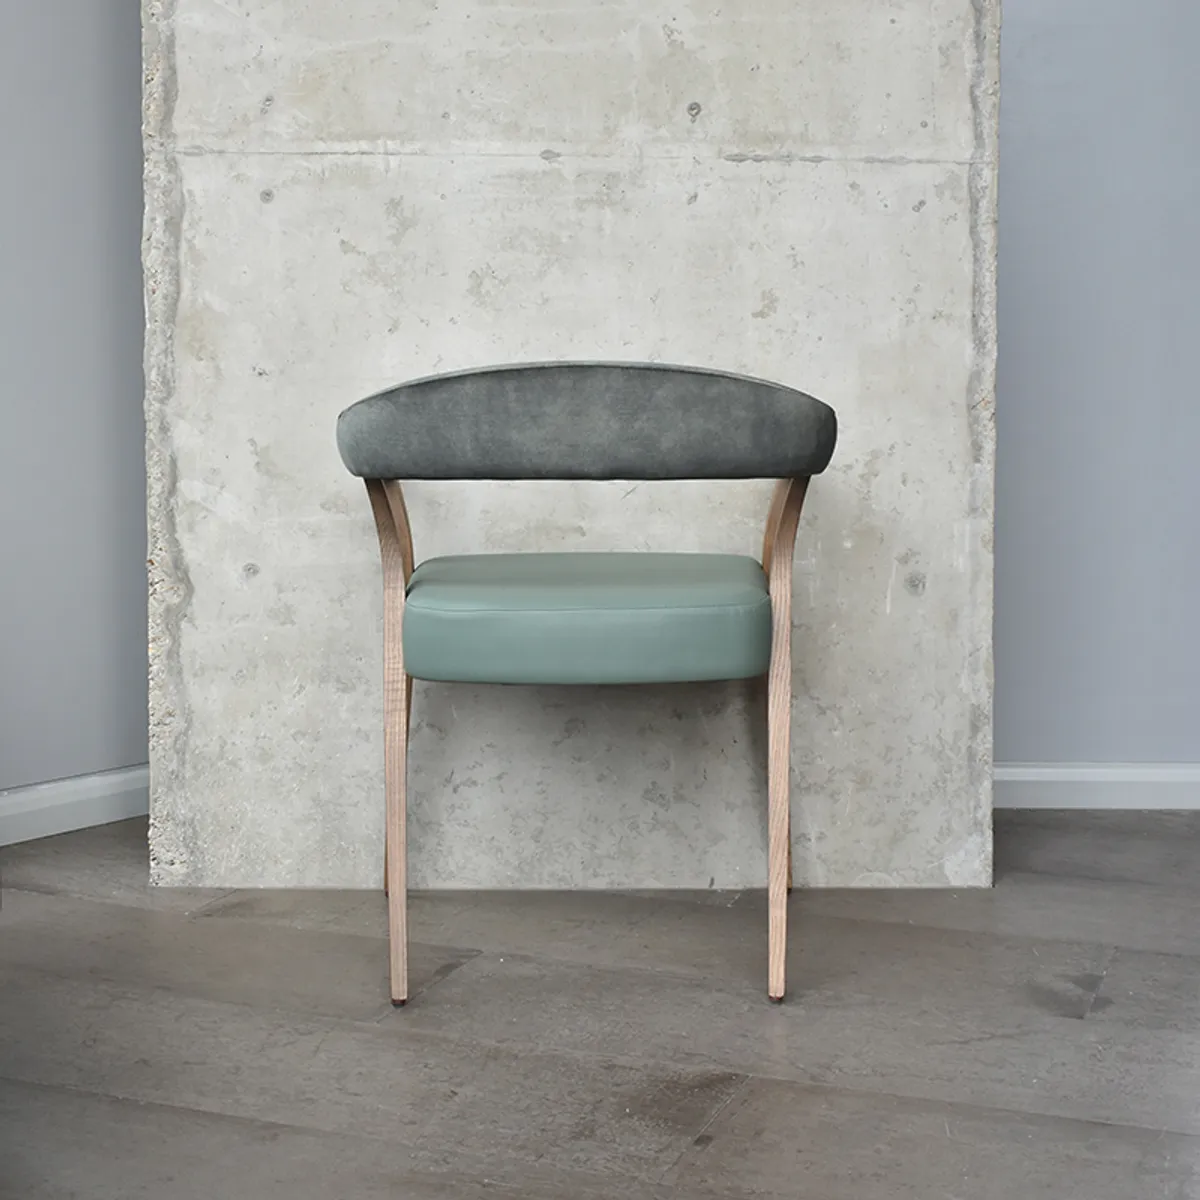 Nannini Armchair New Furniture From Milan 2019 By Inside Out Contracts 030